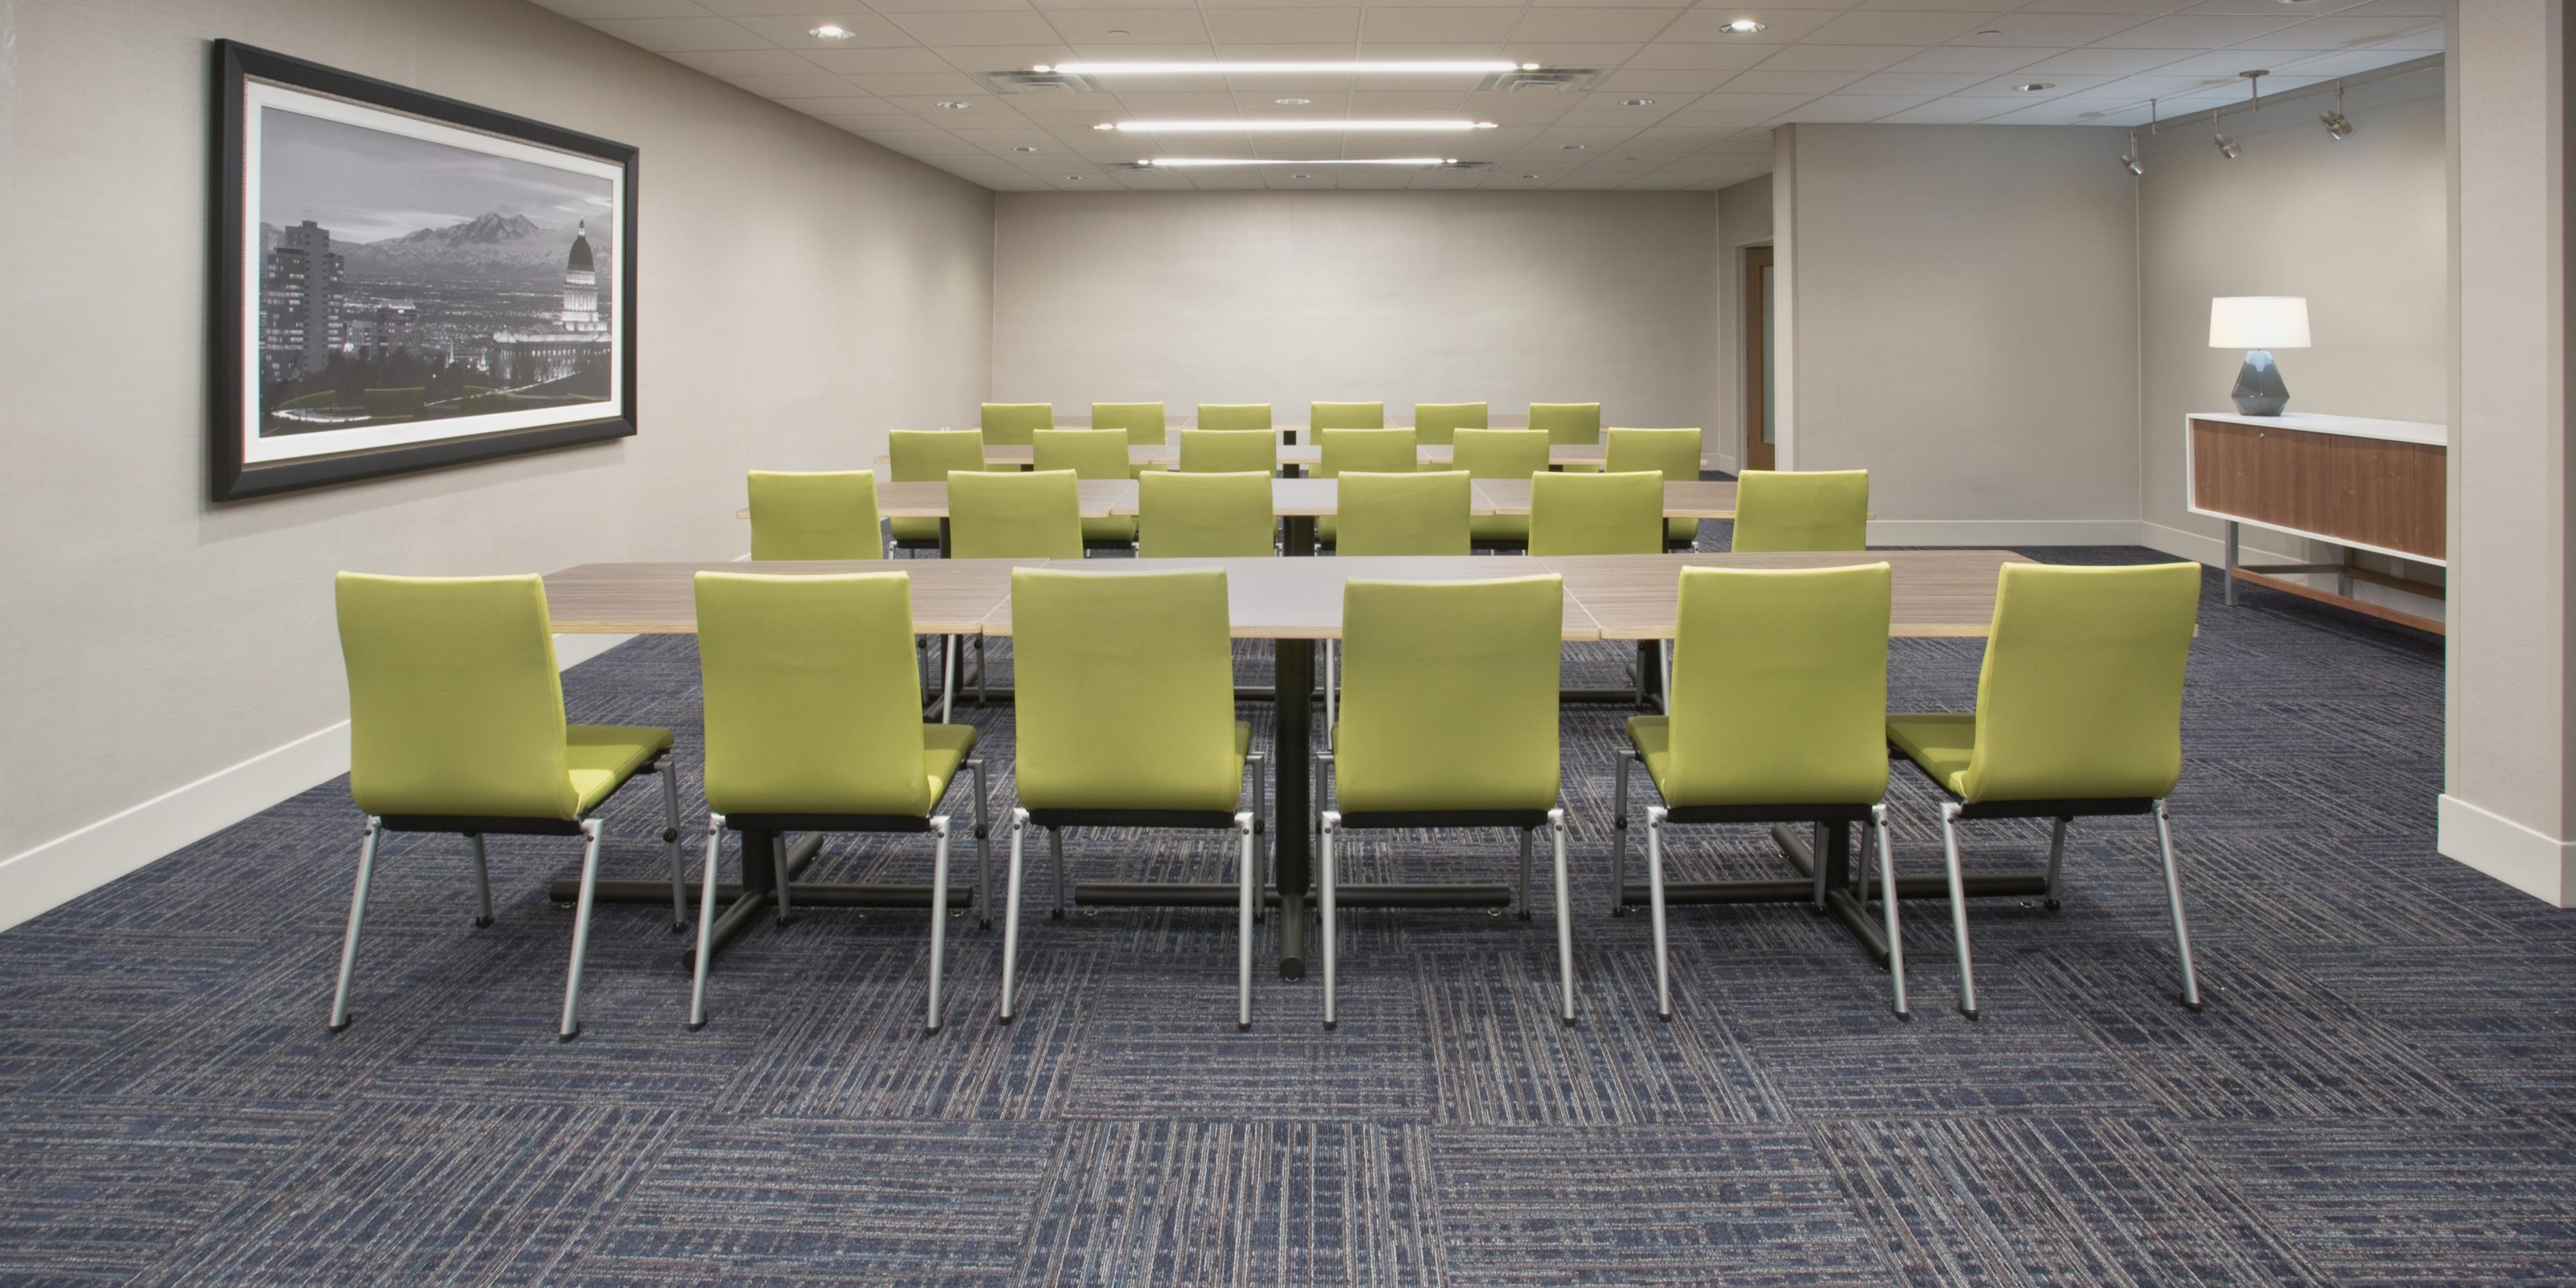 Great for Classroom settings, church gatherings, Wedding events or corporate seminars.  1400 sq ft of meeting space plus additional flex space available.  Call the hotel direct to book your next event.